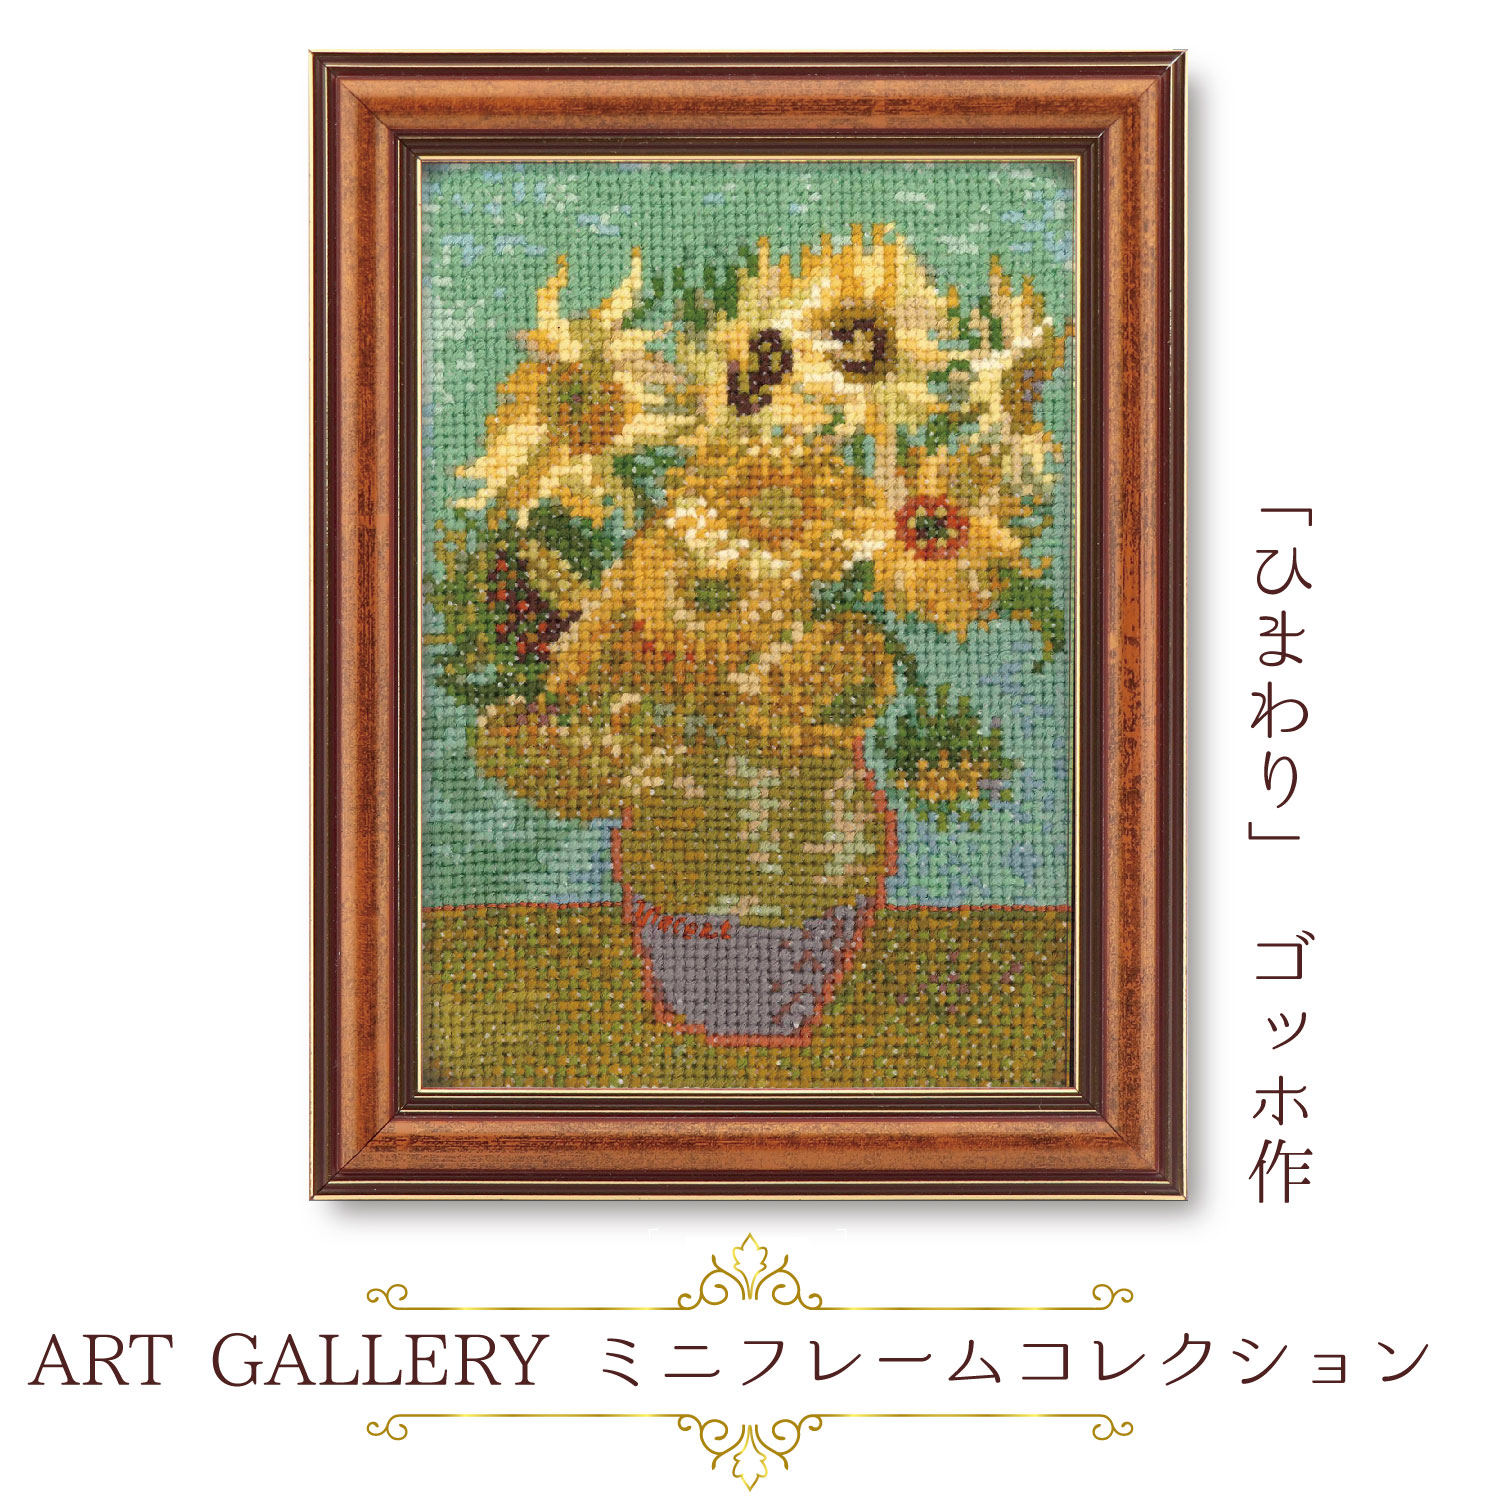 OLY-K7588 Olympus Embroidery Kit ART GALLERY Mini Frame Collection "Sunflower" by Van Gogh (pcs)